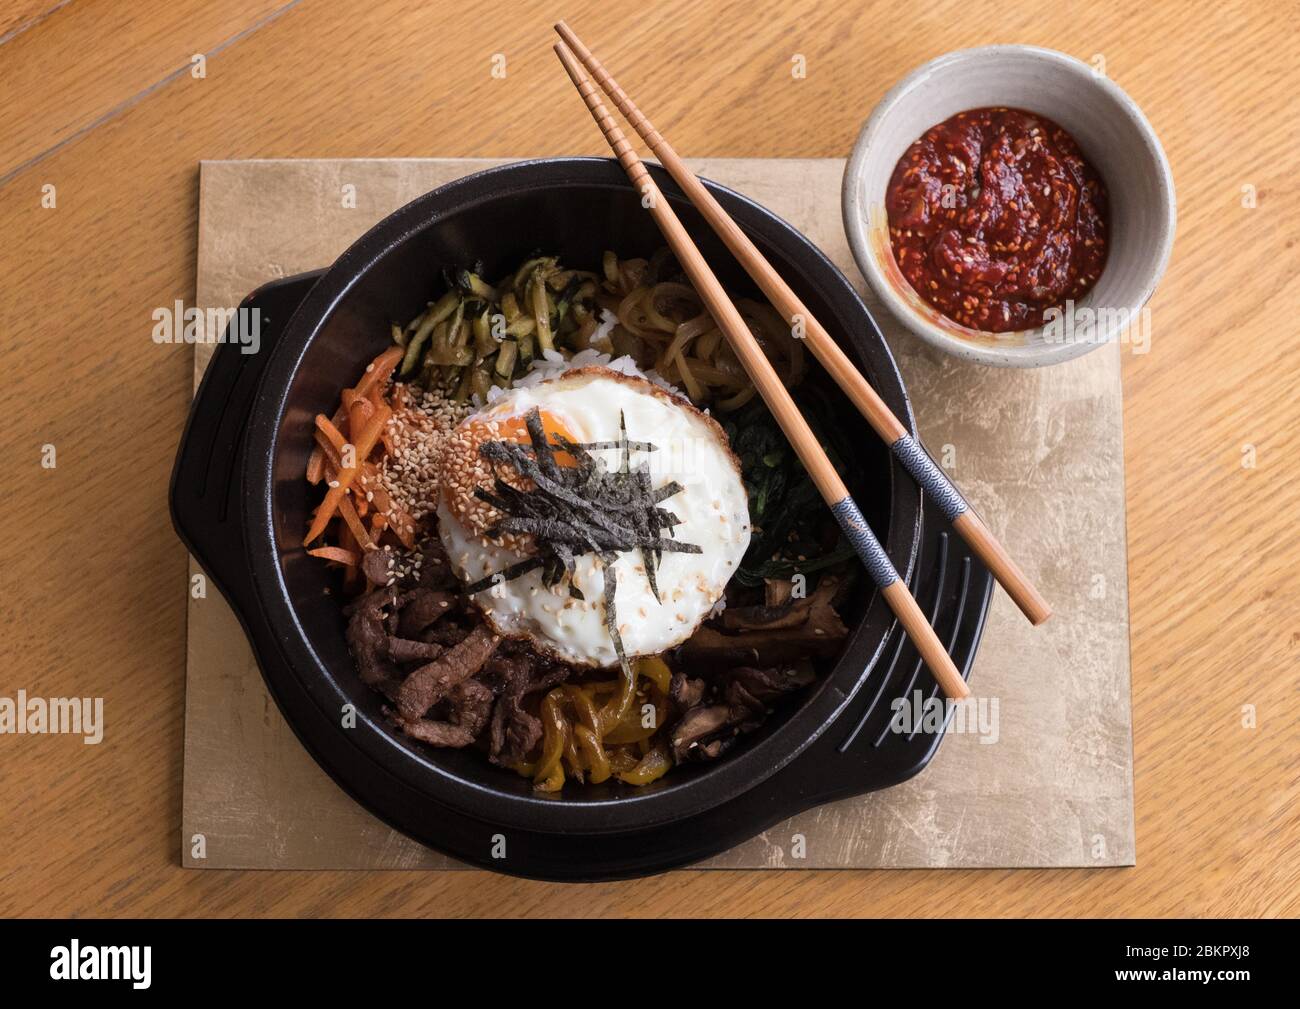 Korean Bibimbap (stir-fried beef and vegetables) served as supper main course at Smoo Lodge boutique B&B in Durness, Sutherland, Scotland Stock Photo